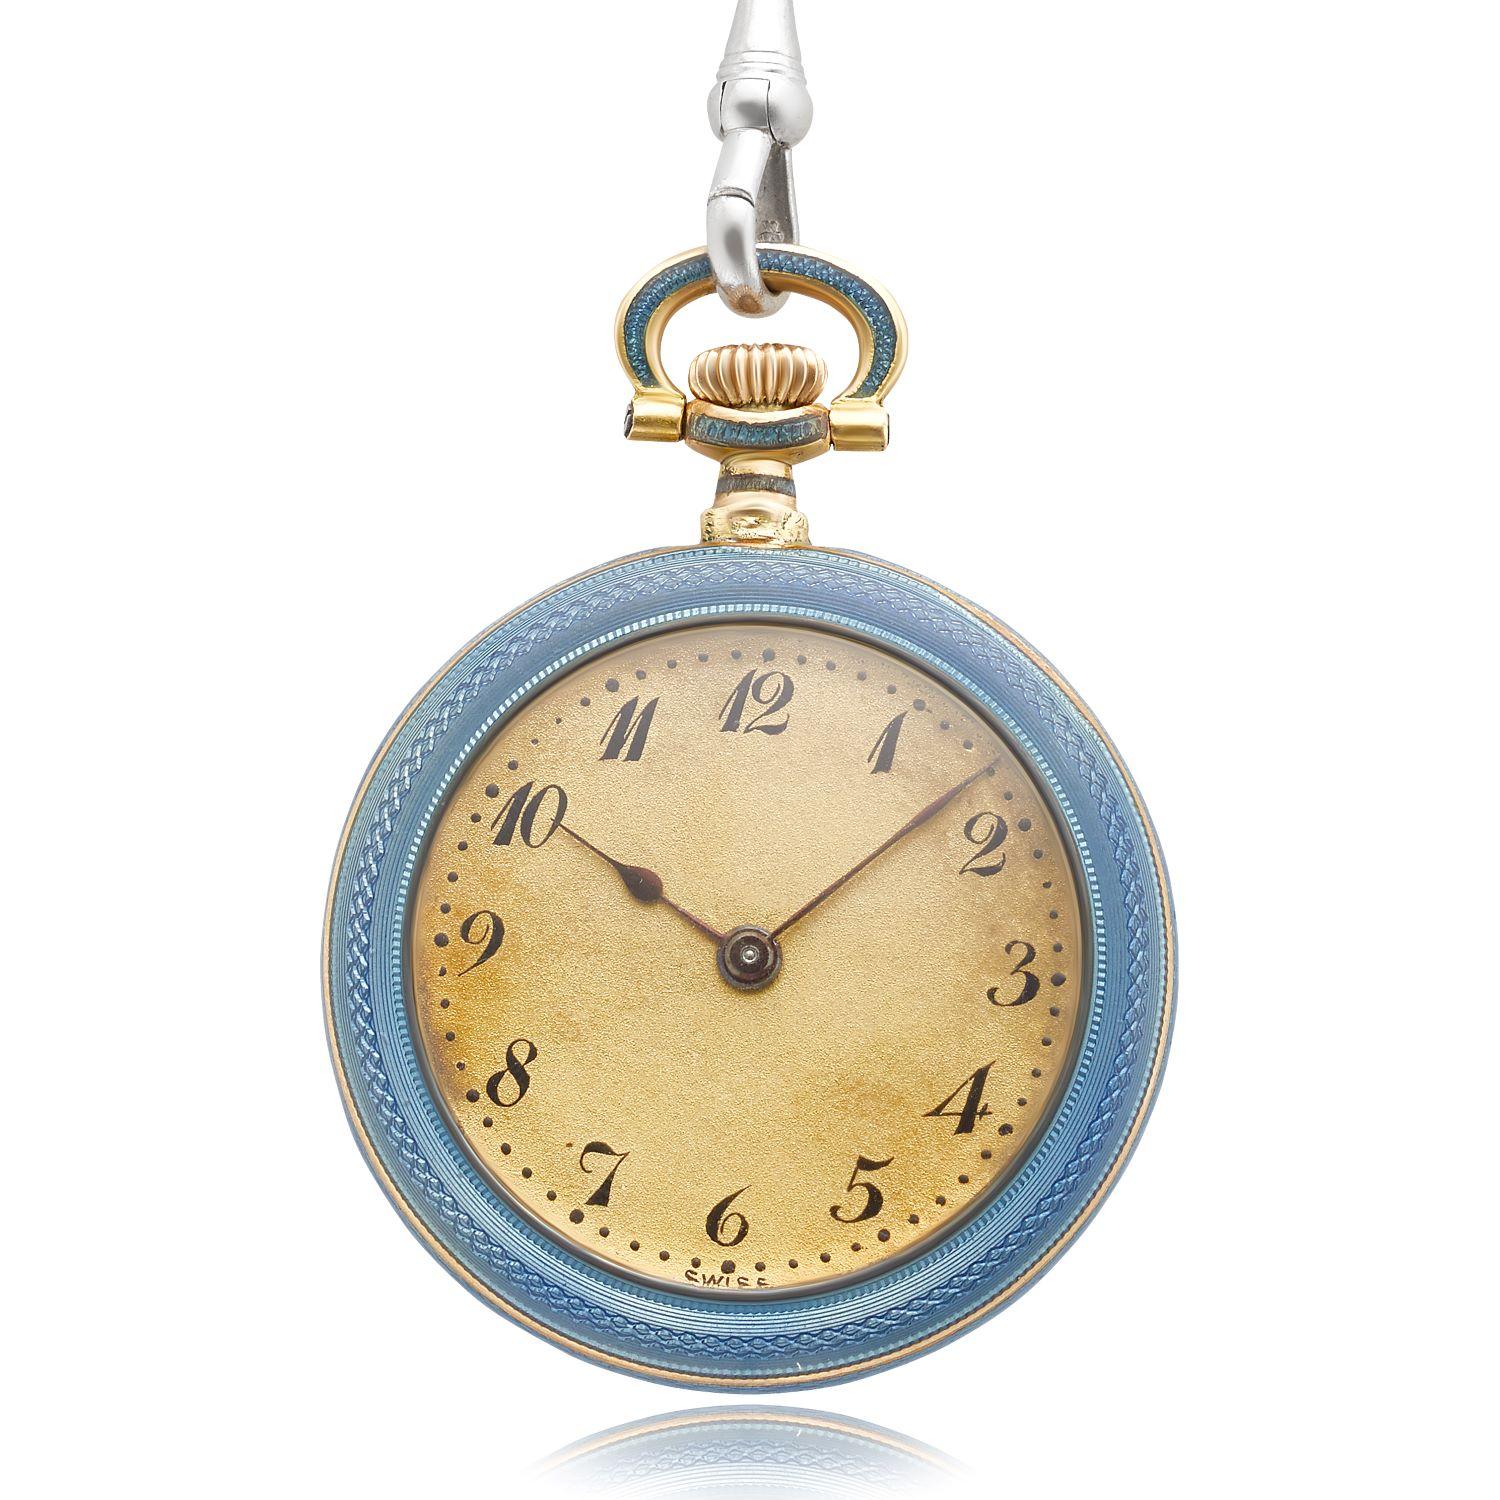 This unique Edwardian era pendant watch necklace is crafted with 14 karat yellow gold and enamel. The back of the watch is accented with a platinum filigree design on a blue sunburst enamel case. The filigree design is set with seven rose cut